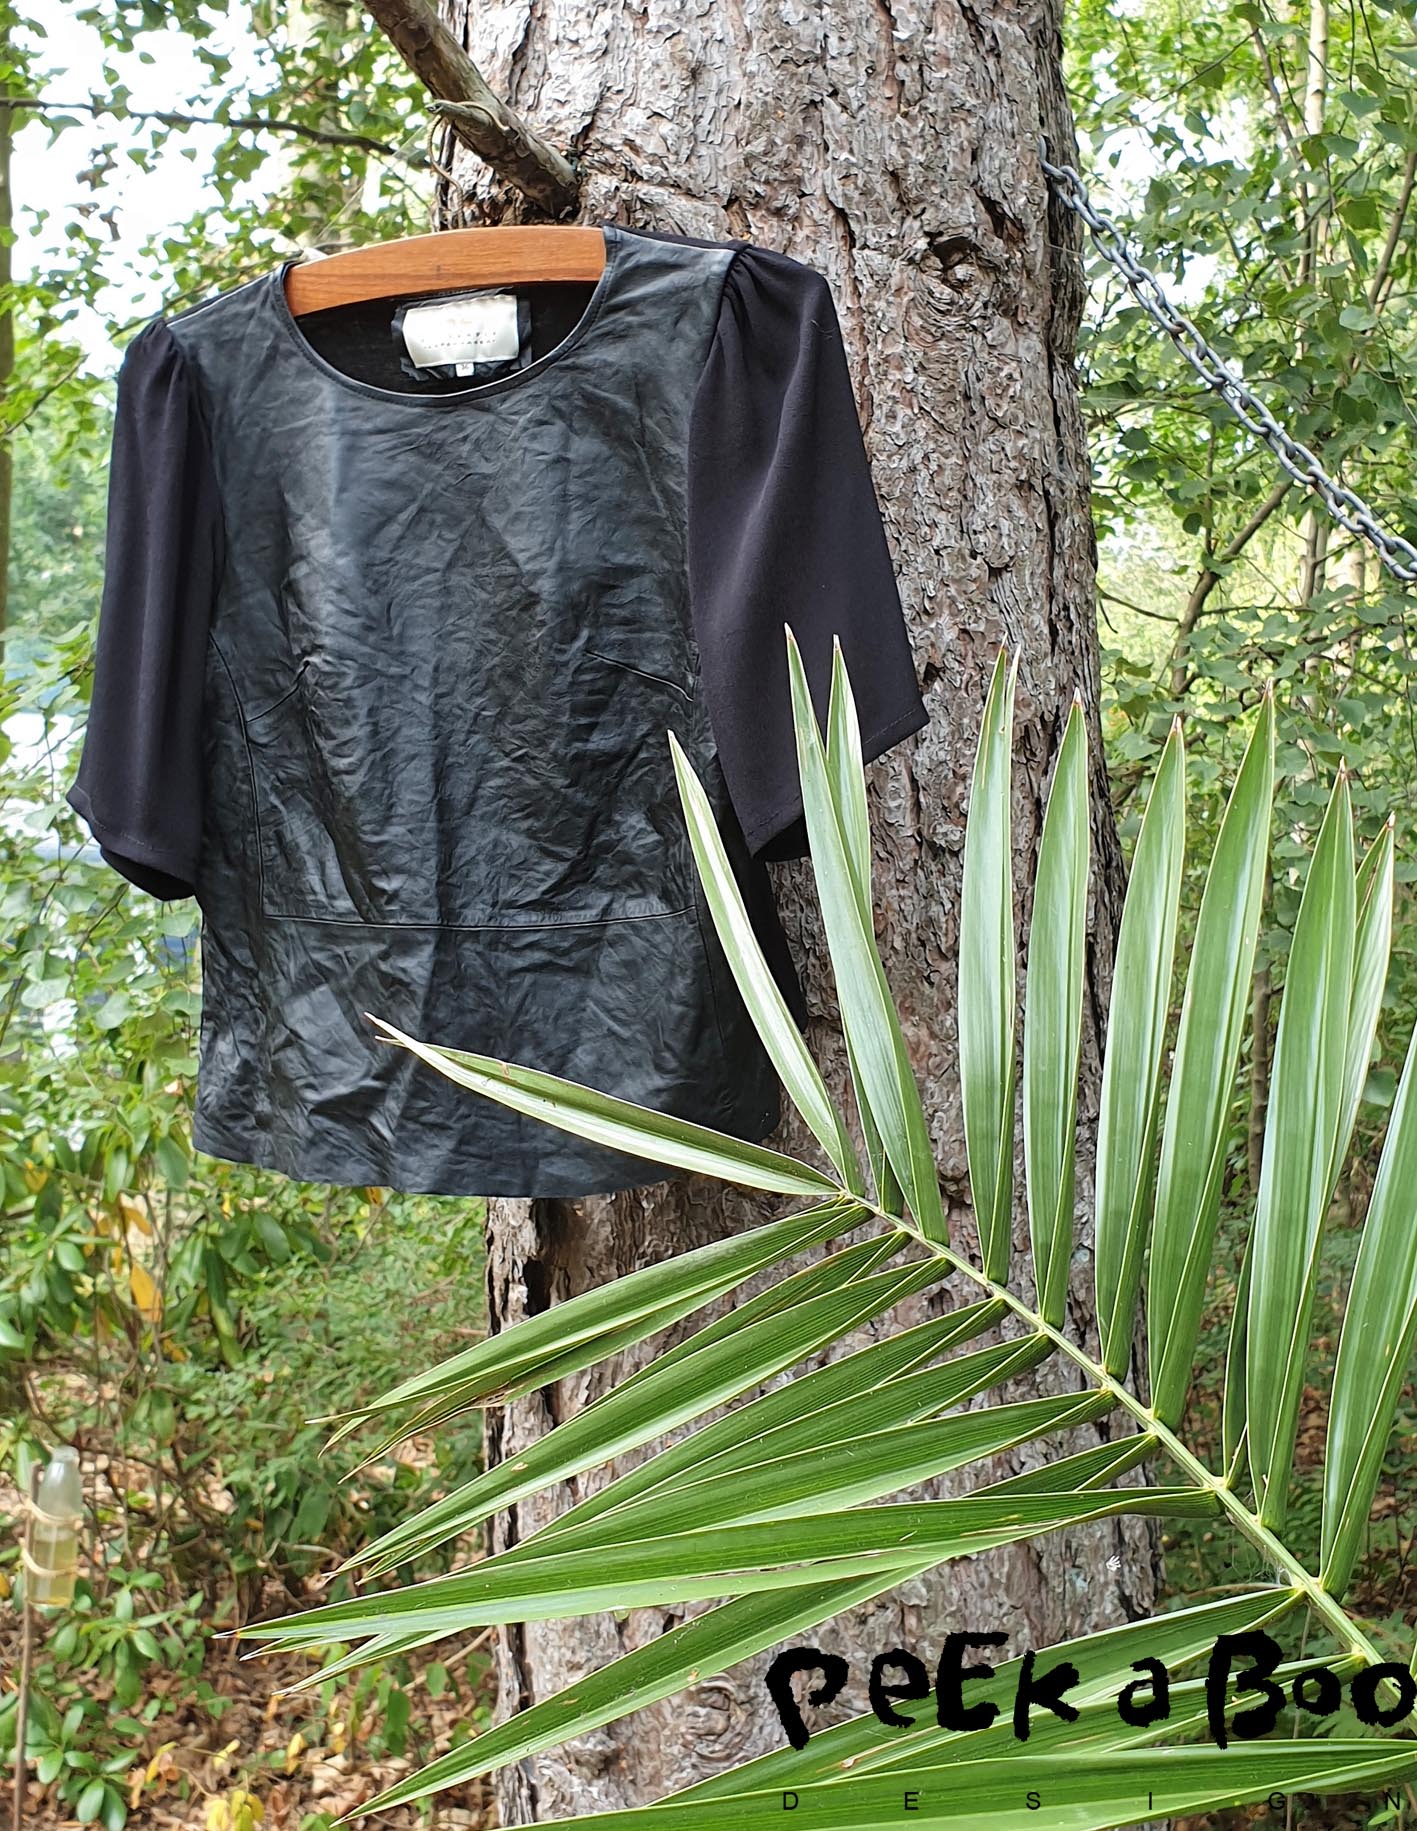 The finished wrinkle t-shirt in leather with new crepe puff sleeves